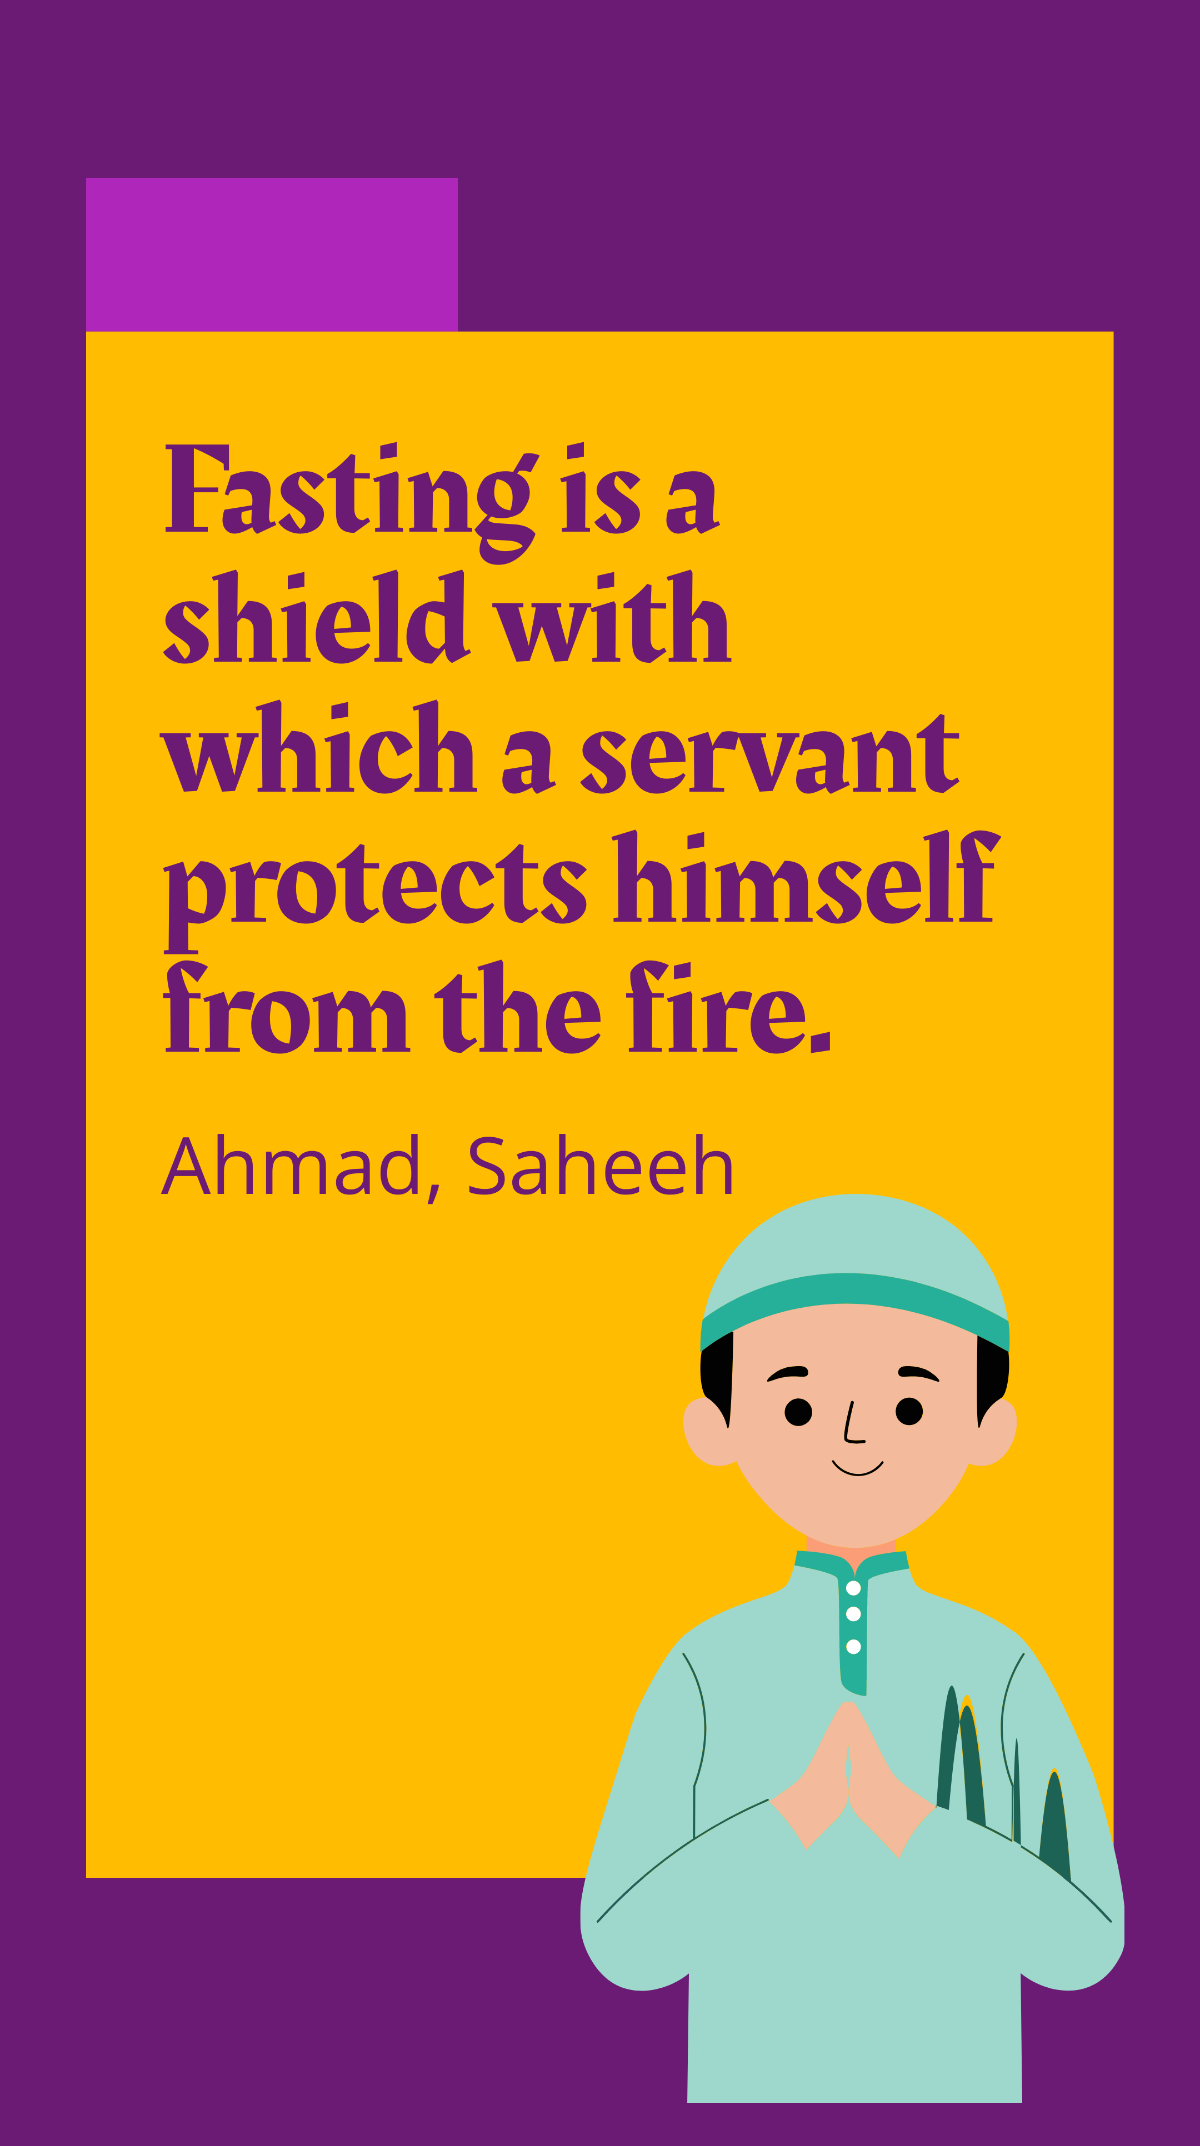 Ahmad, Saheeh - Fasting is a shield with which a servant protects himself from the fire. Template